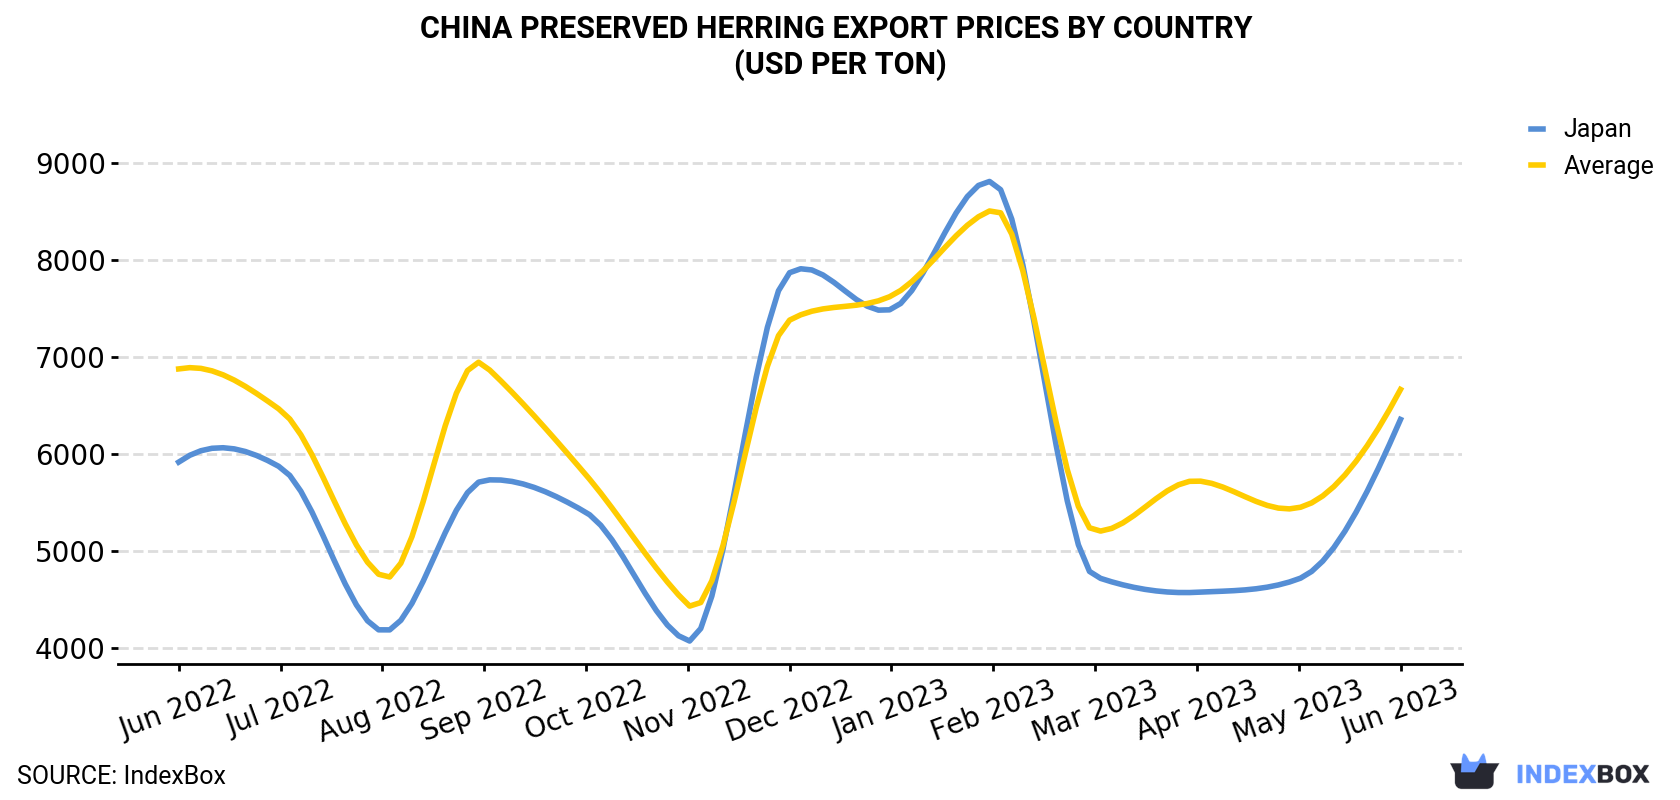 China Preserved Herring Export Prices By Country (USD Per Ton)